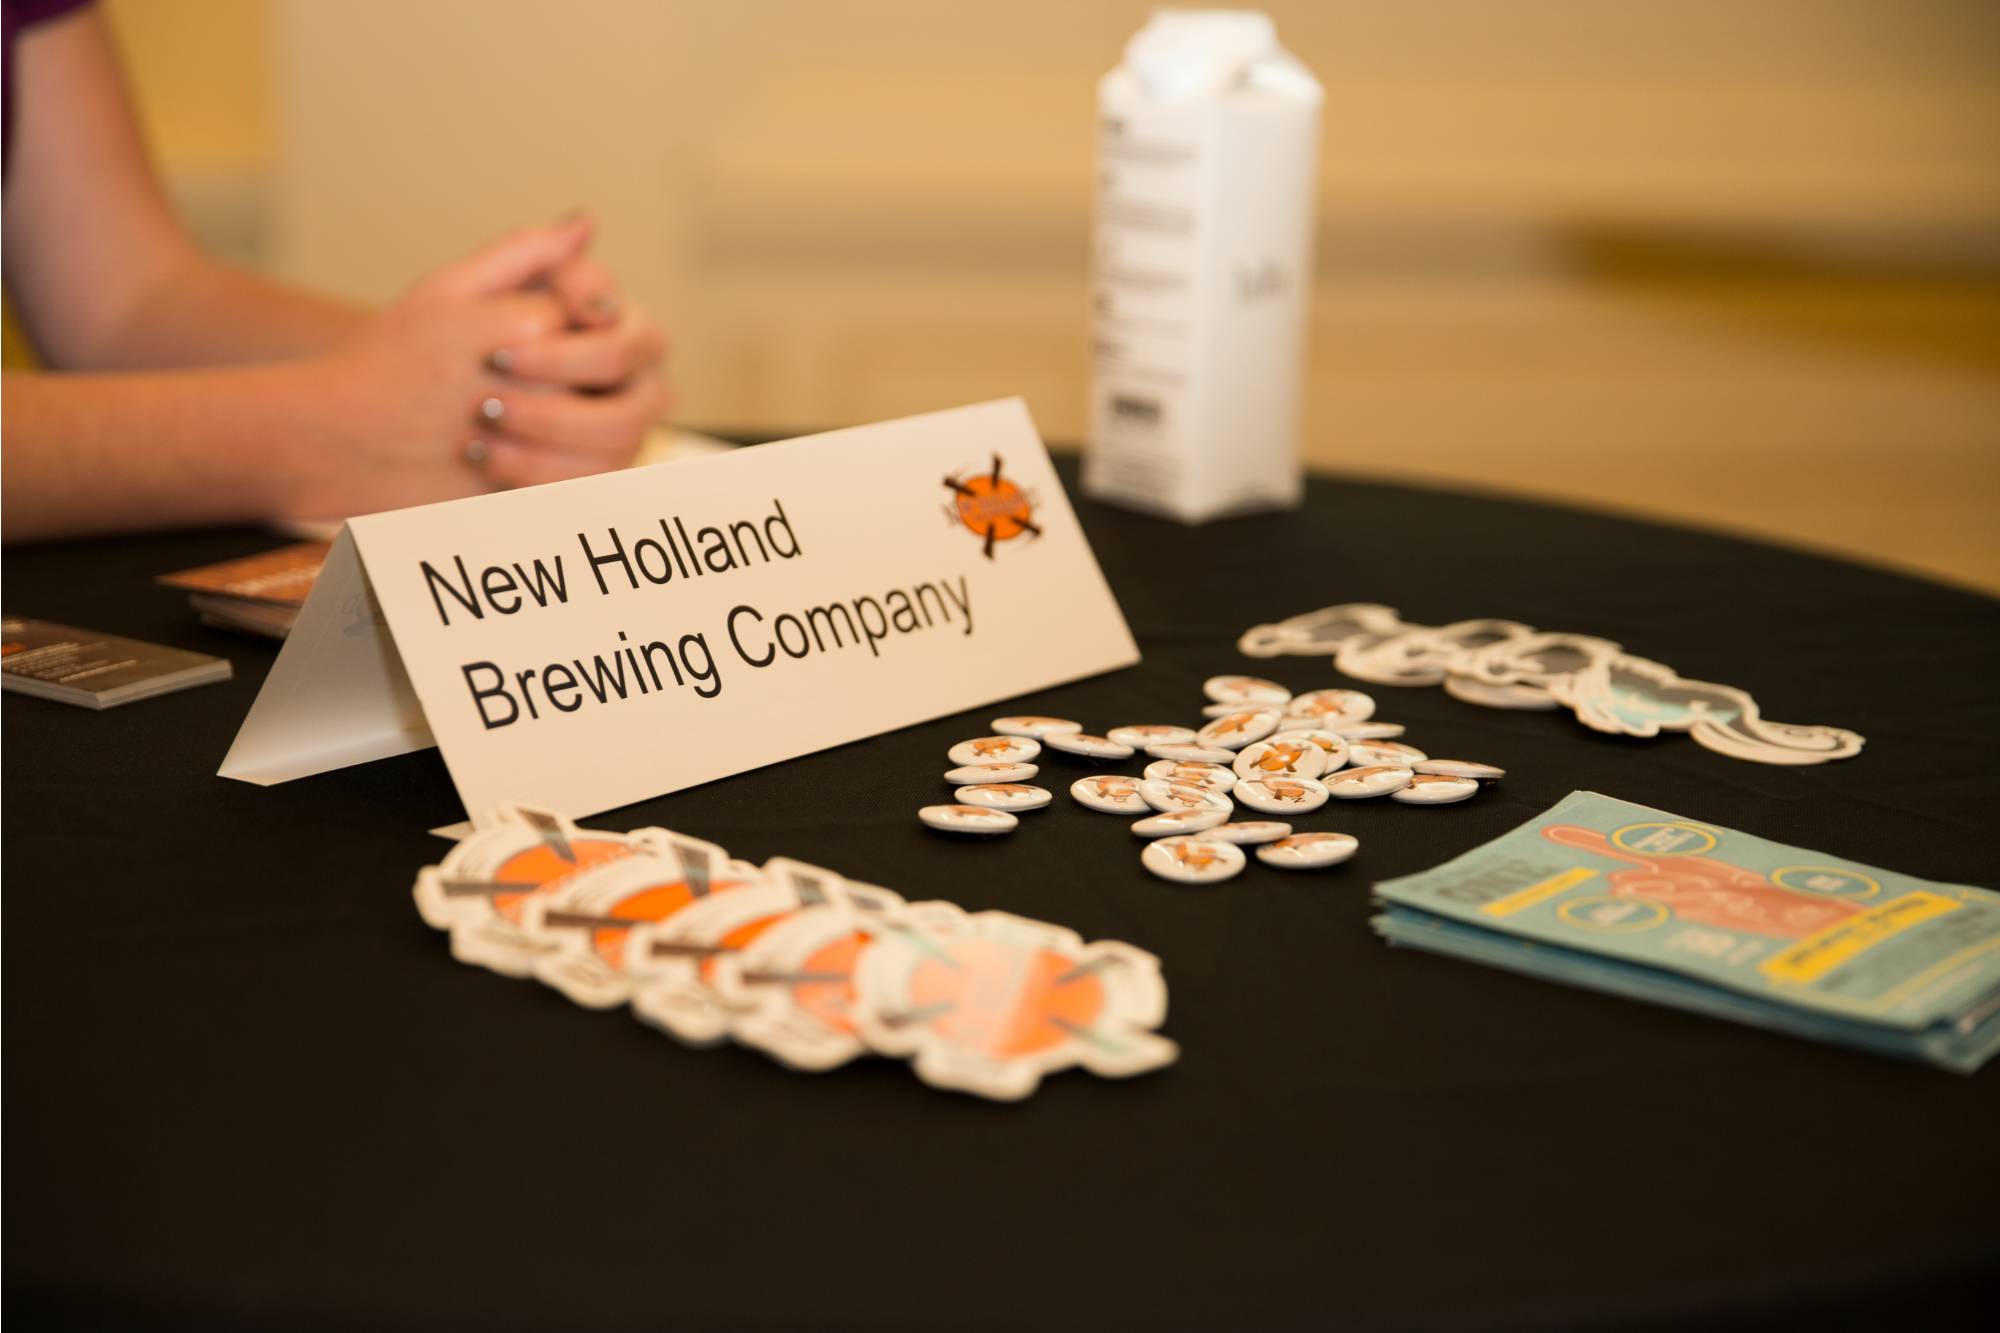 New Holland Brewing Company employment information on a table